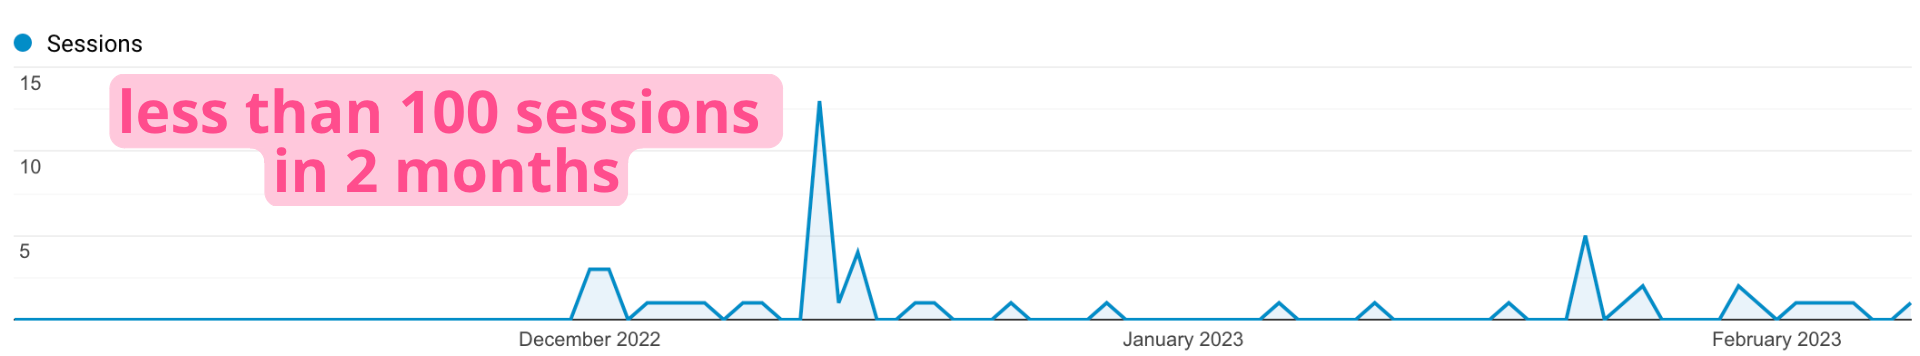 Screenshot of a Google Analytics traffic line graph, showing traffic over the period of December 2022 to February 2023 for a single blog post. The traffic spikes once in mid December to 15 sessions but otherwise is below 5 sessions a day.